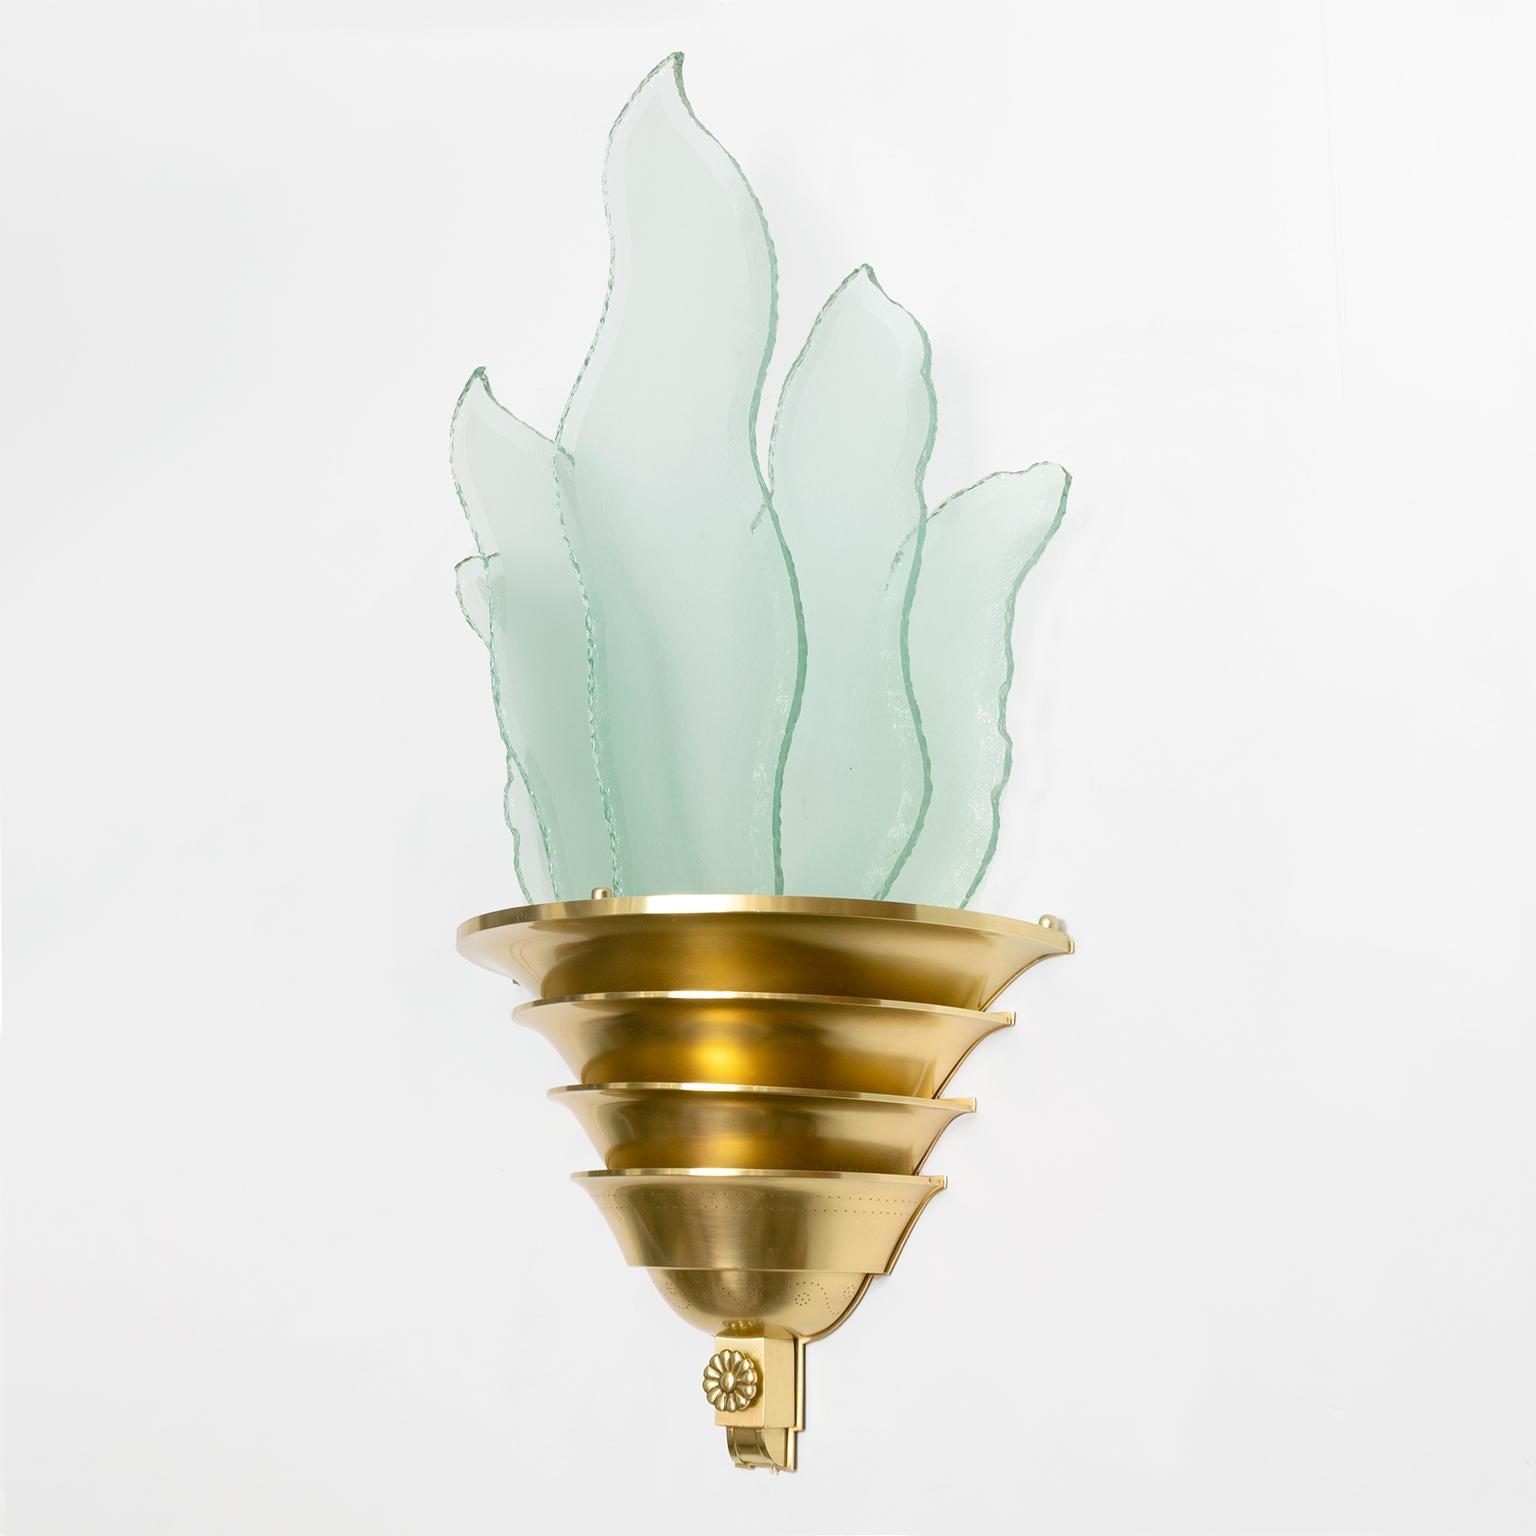 A large dramatic Scandinavian Modern, Swedish Art Deco sconce with a tiered brass body which holds 5 handcut, polished and acid etched flame shaped glass panels. Newly polished and lacquered body, wired for use in the USA with 2 standard base